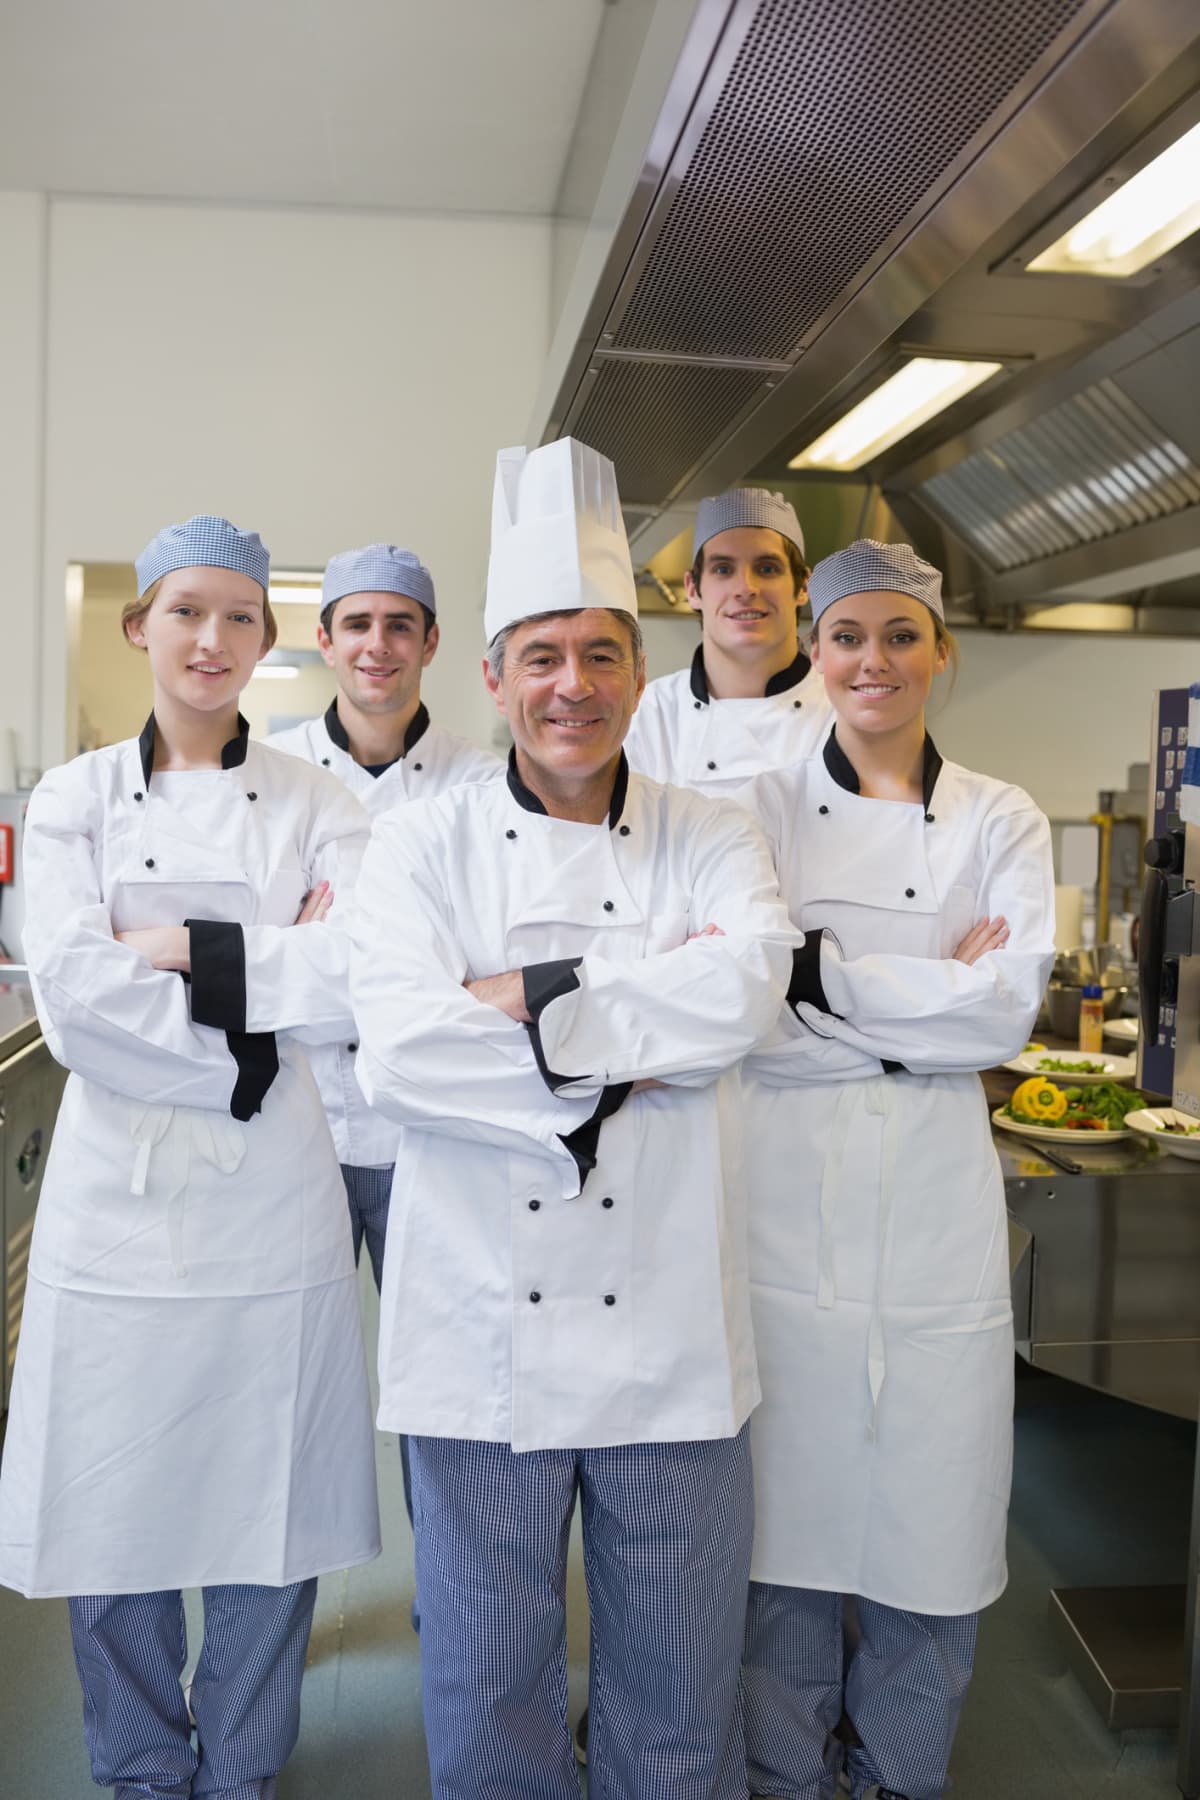 Smiling team of chefs standing with arms crossed in kitchen